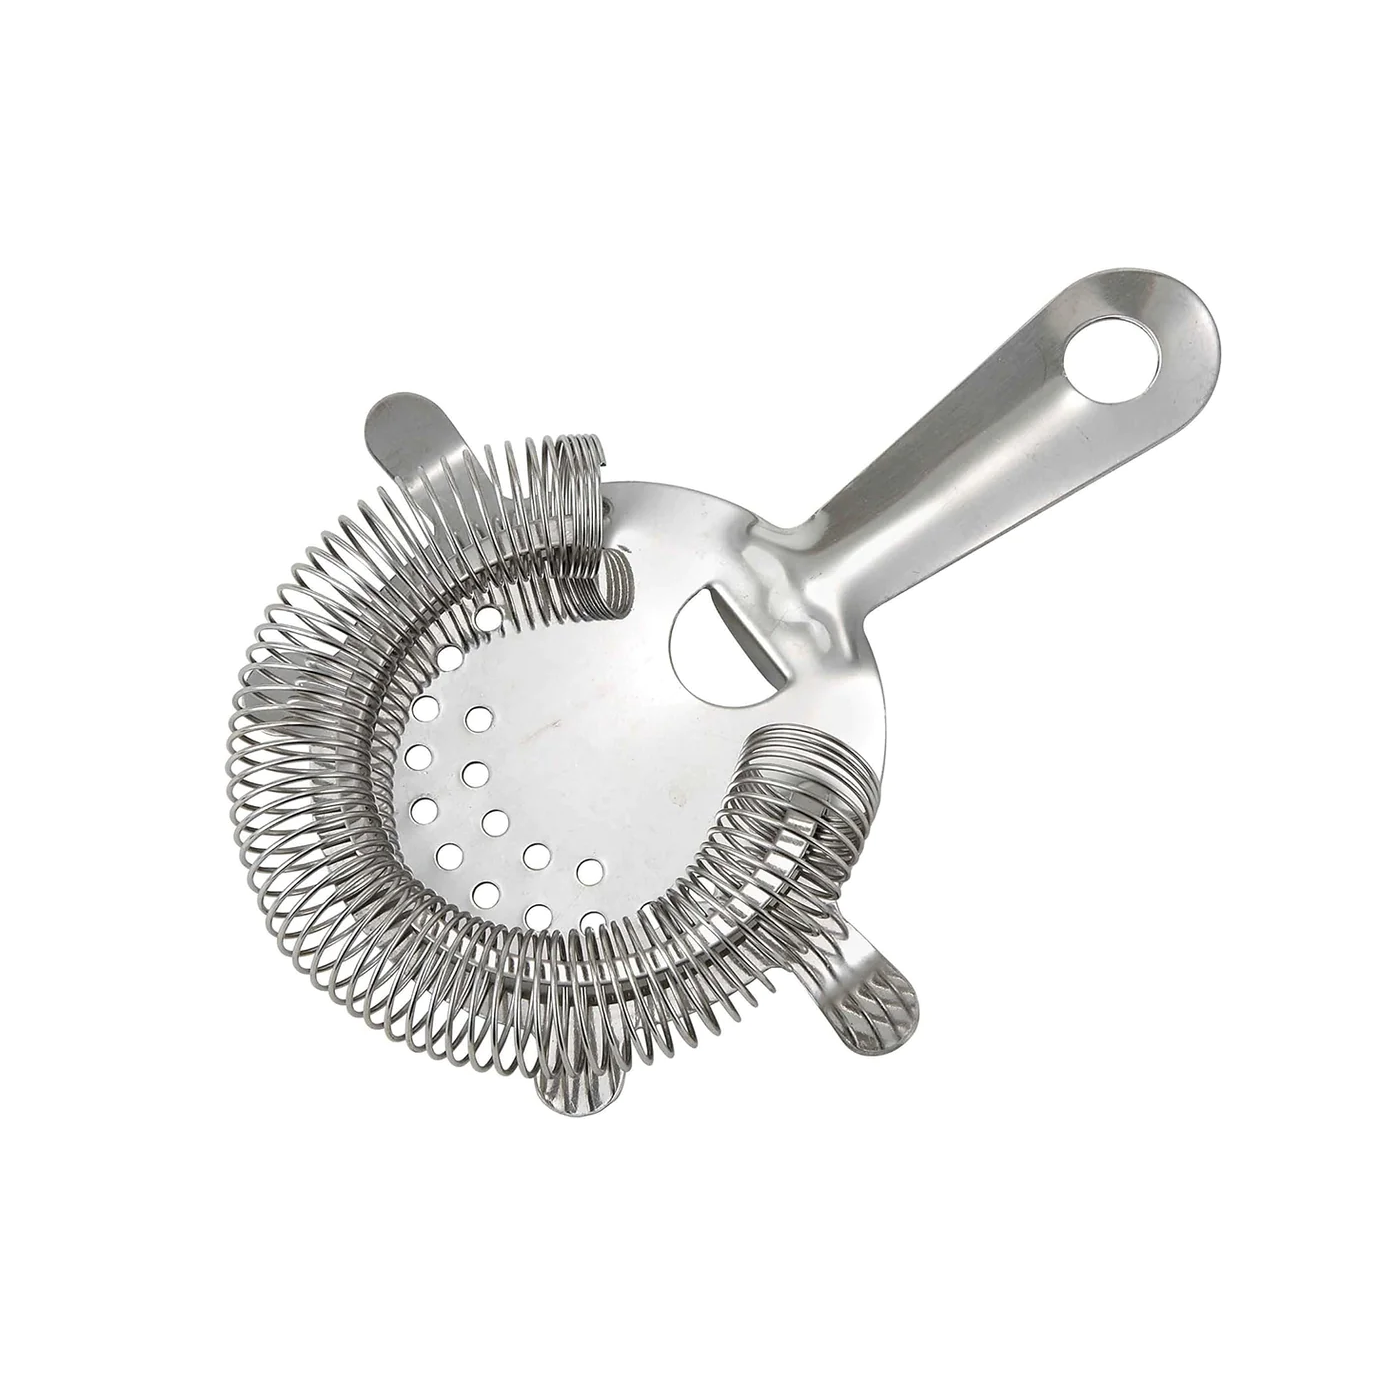 Stainless Steel 4 Prong Strainer - Lunaz Shop